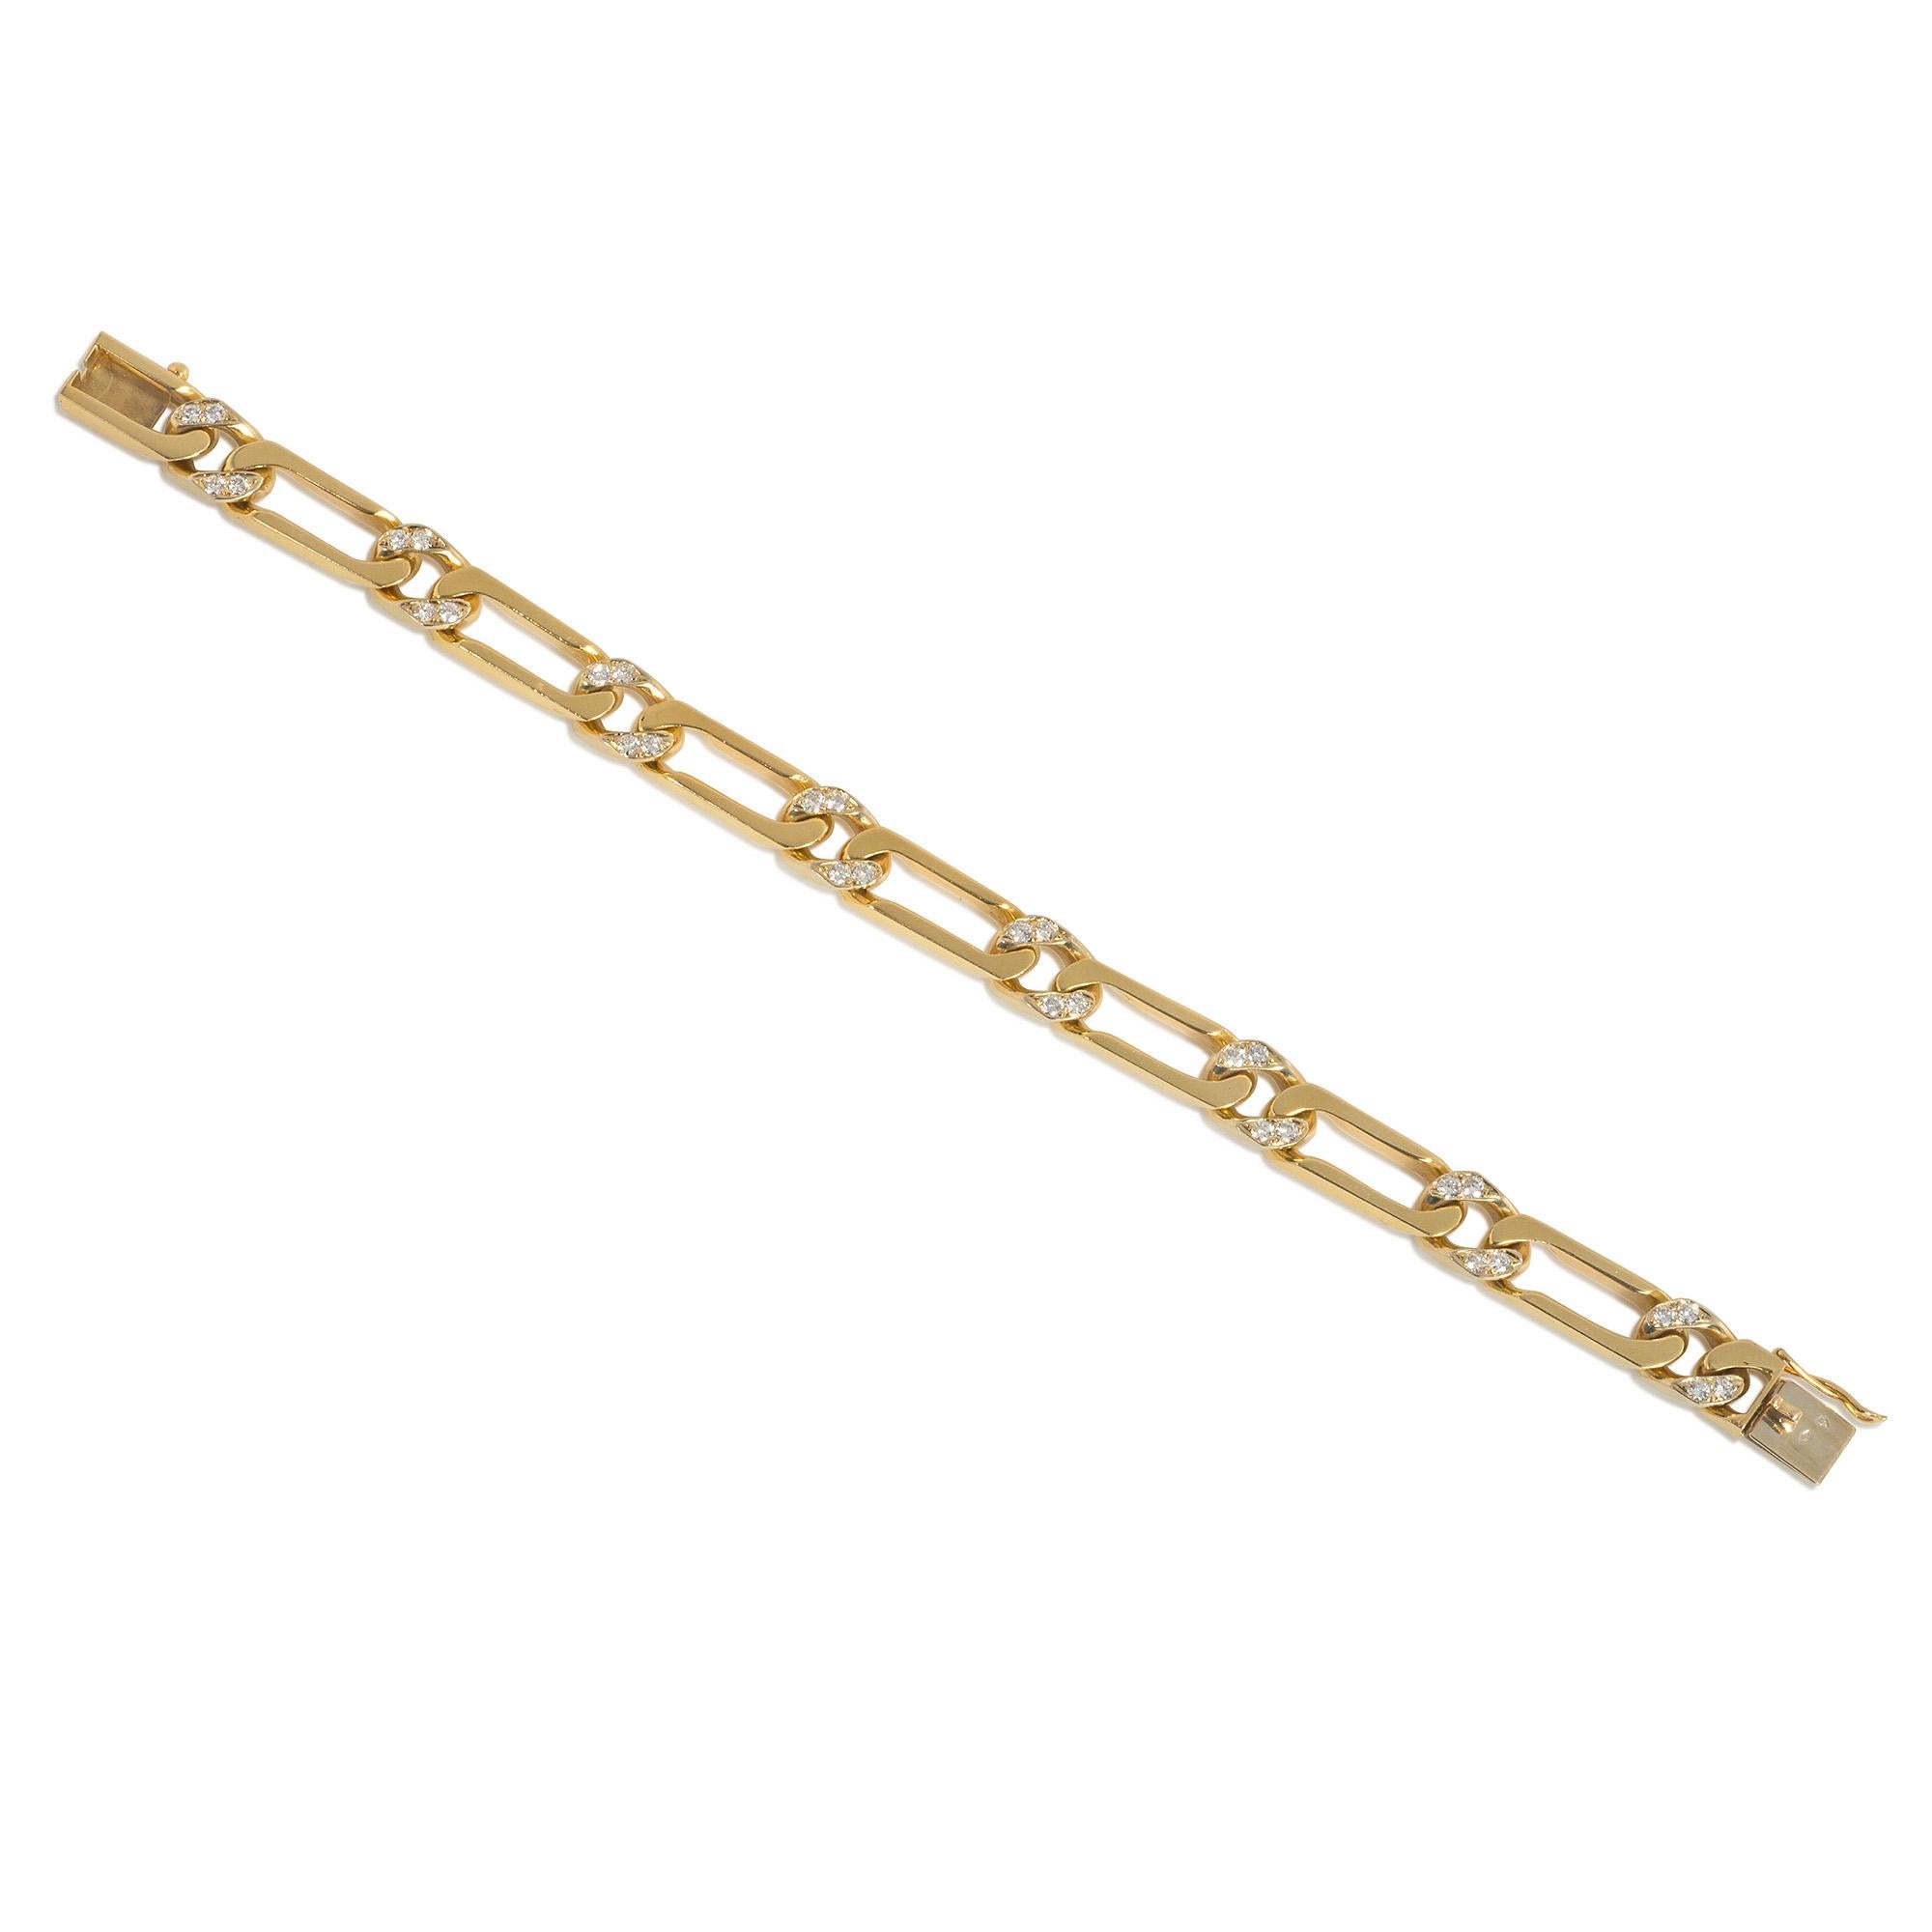 A Mid-Century gold and diamond figaro link bracelet, in 18k, completed by a box clasp with figure-8 safety. Van Cleef & Arpels, France. #B2174 A43. Atw diamonds 0.96 ct.  Wonderful heft while also refined in scale

* Includes letter of